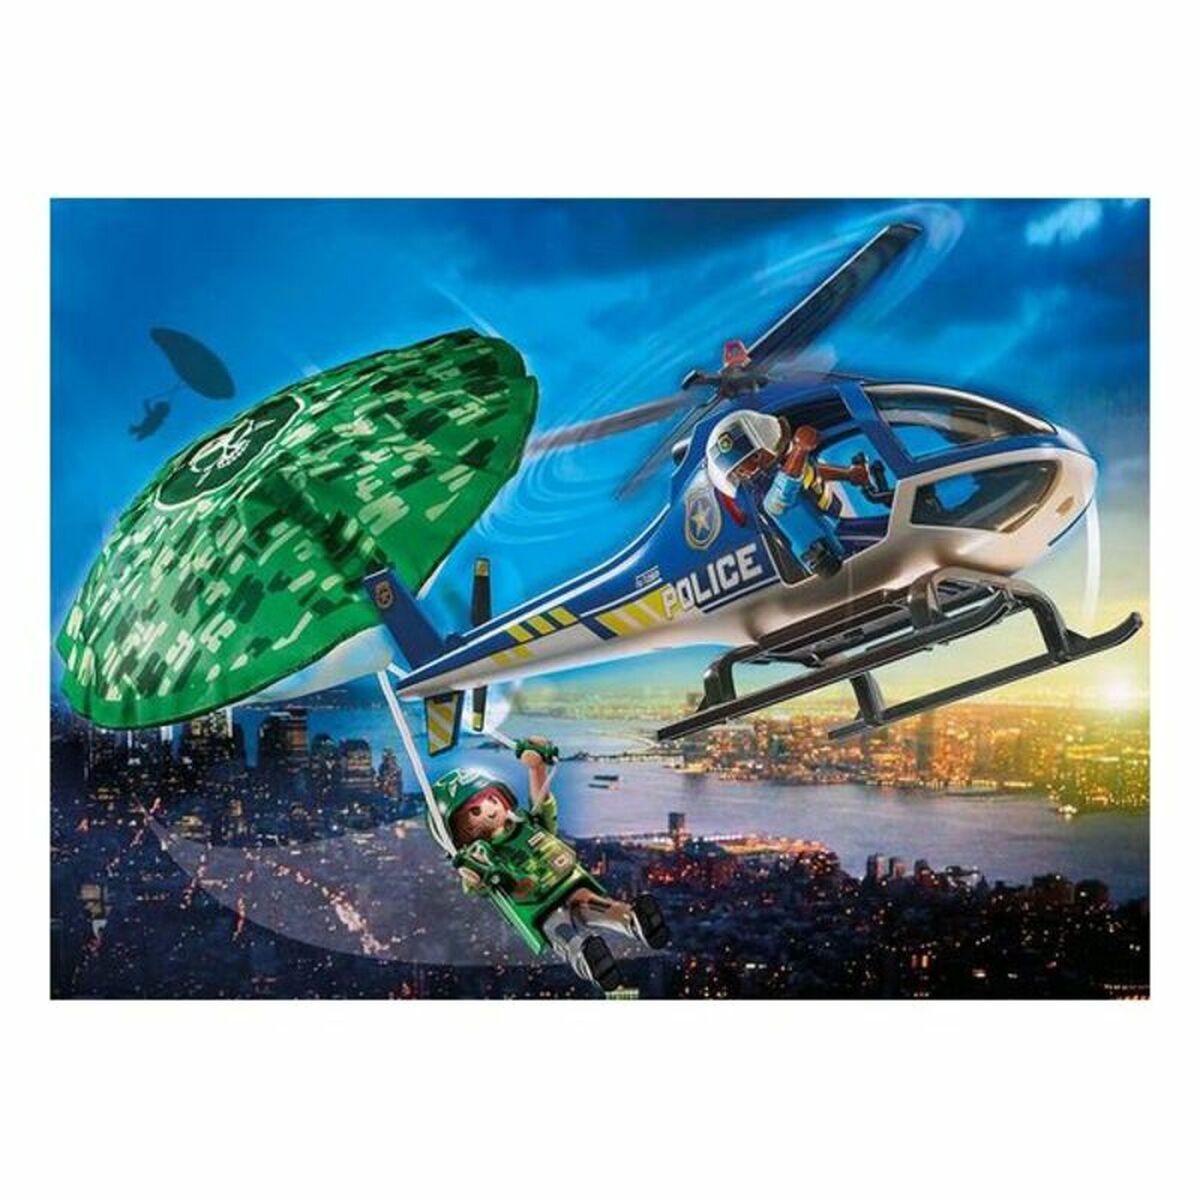 Playset  City Action Police helicopter: Parachute Chase Playmobil